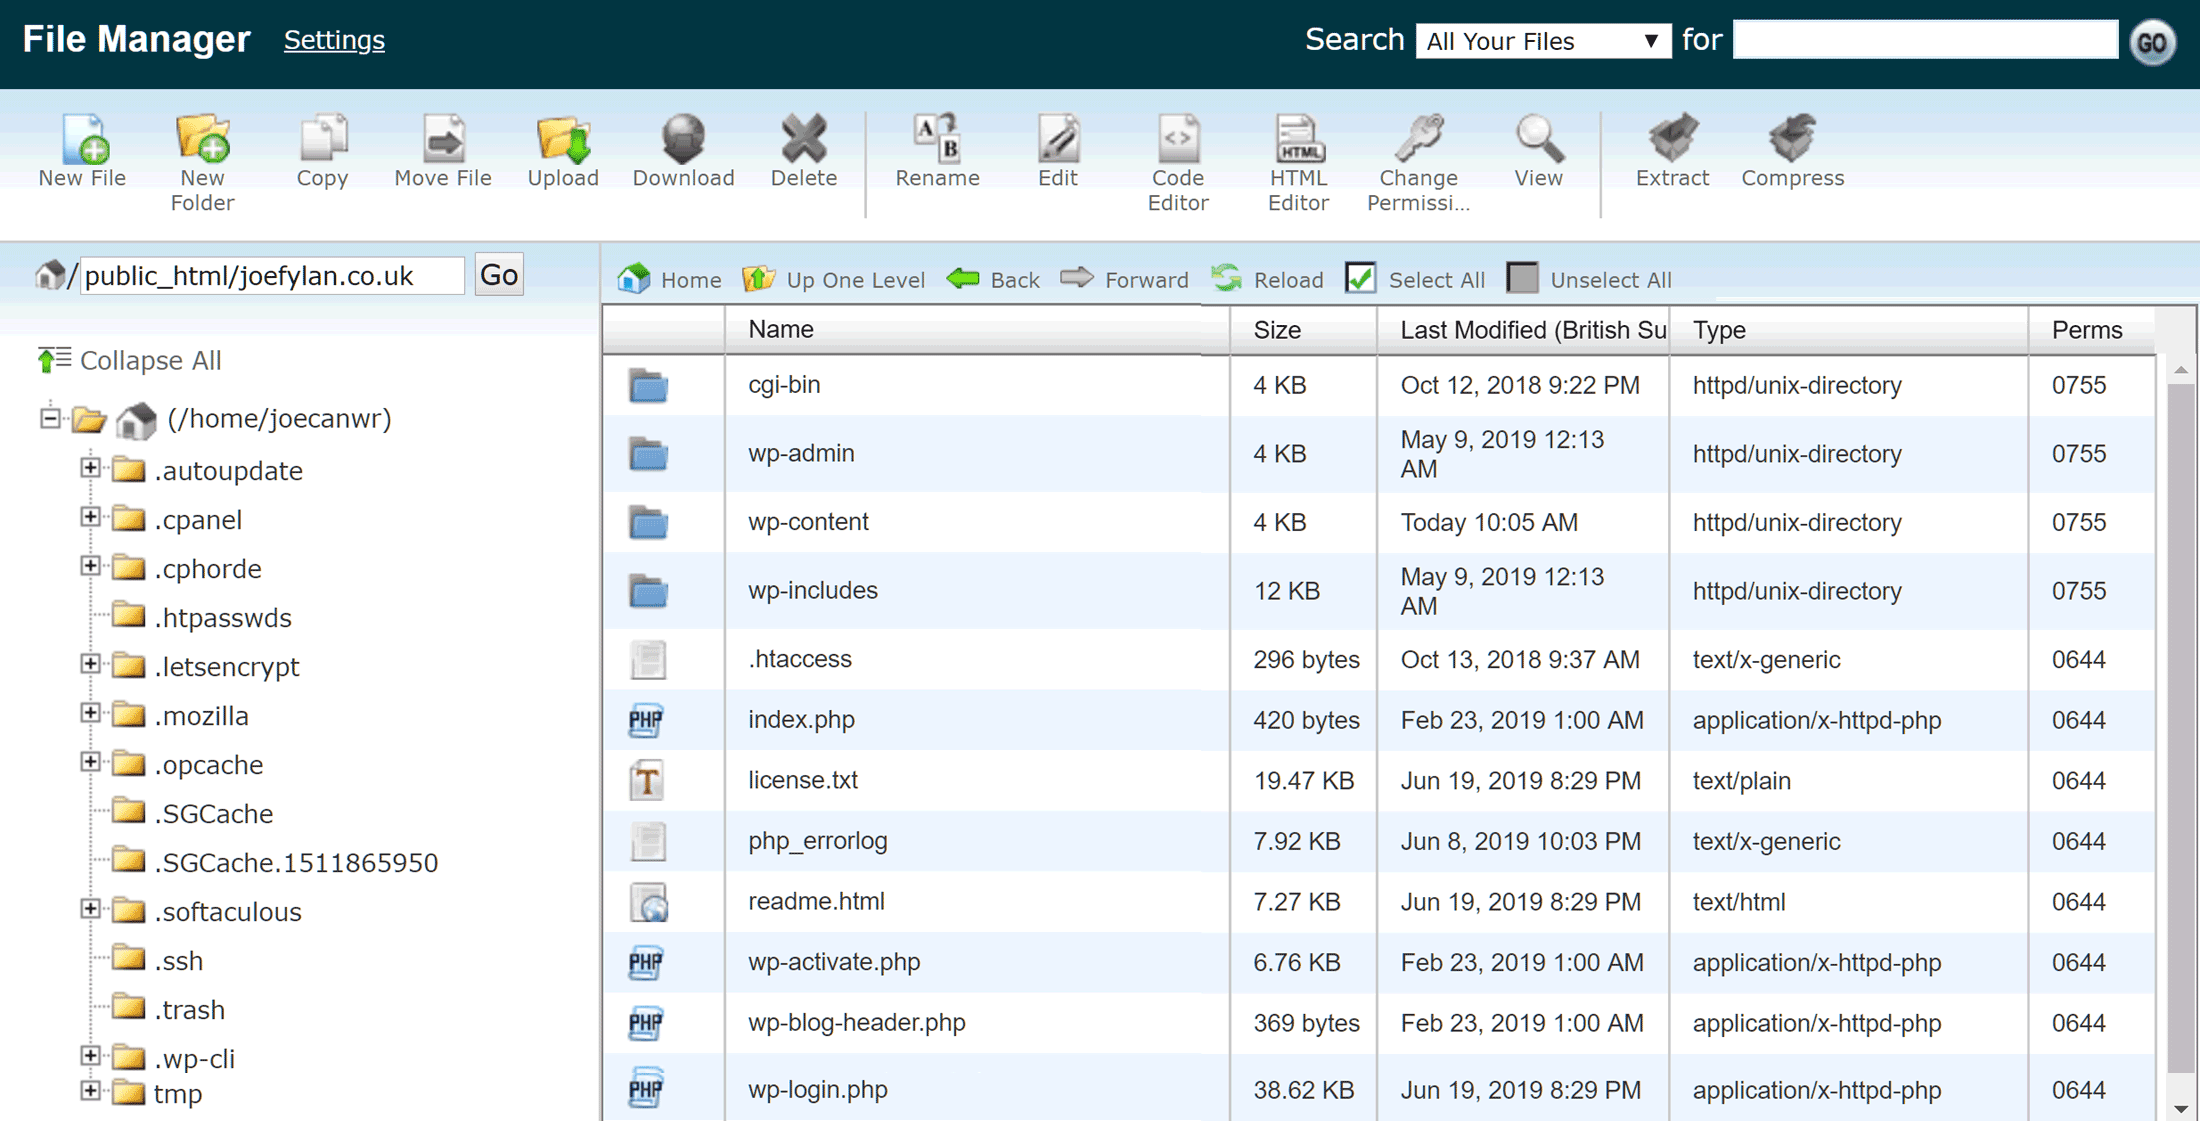 SiteGround File Manager